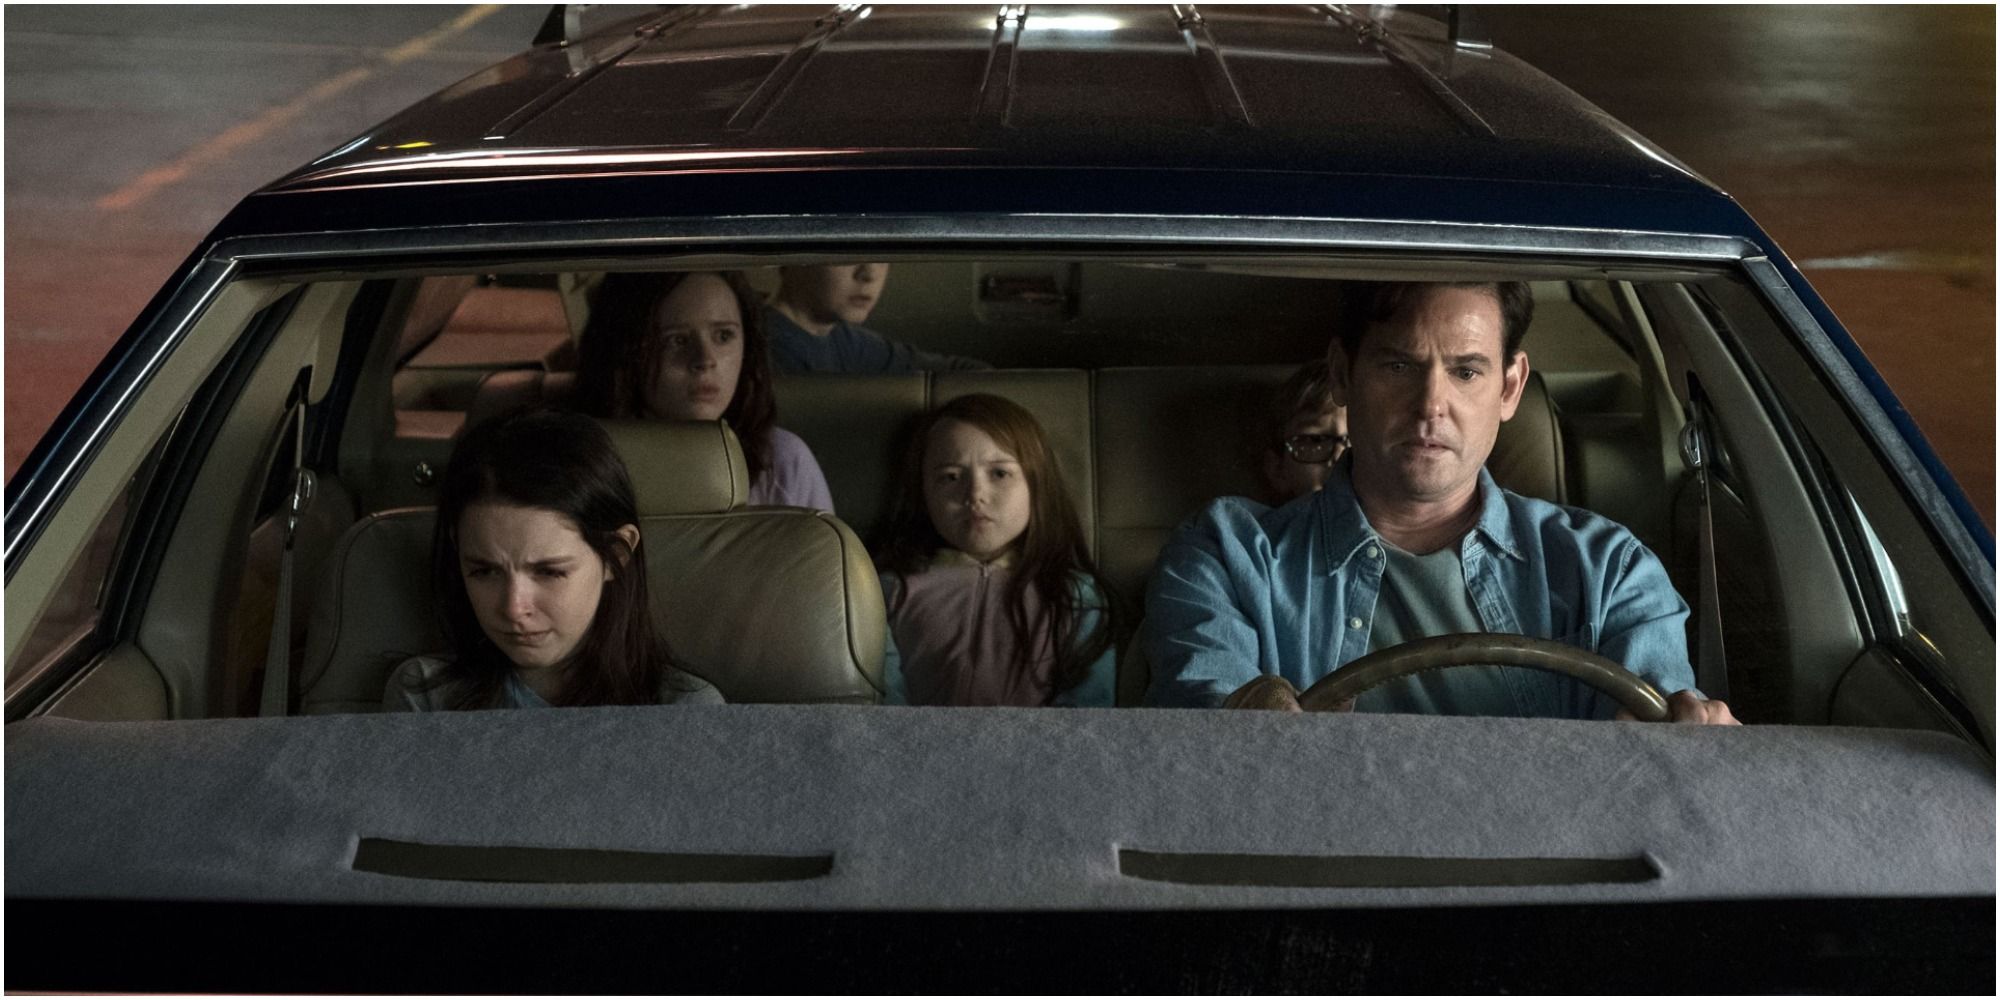 A still shot of the Crain children and their father Hugh in The Haunting of Hill House